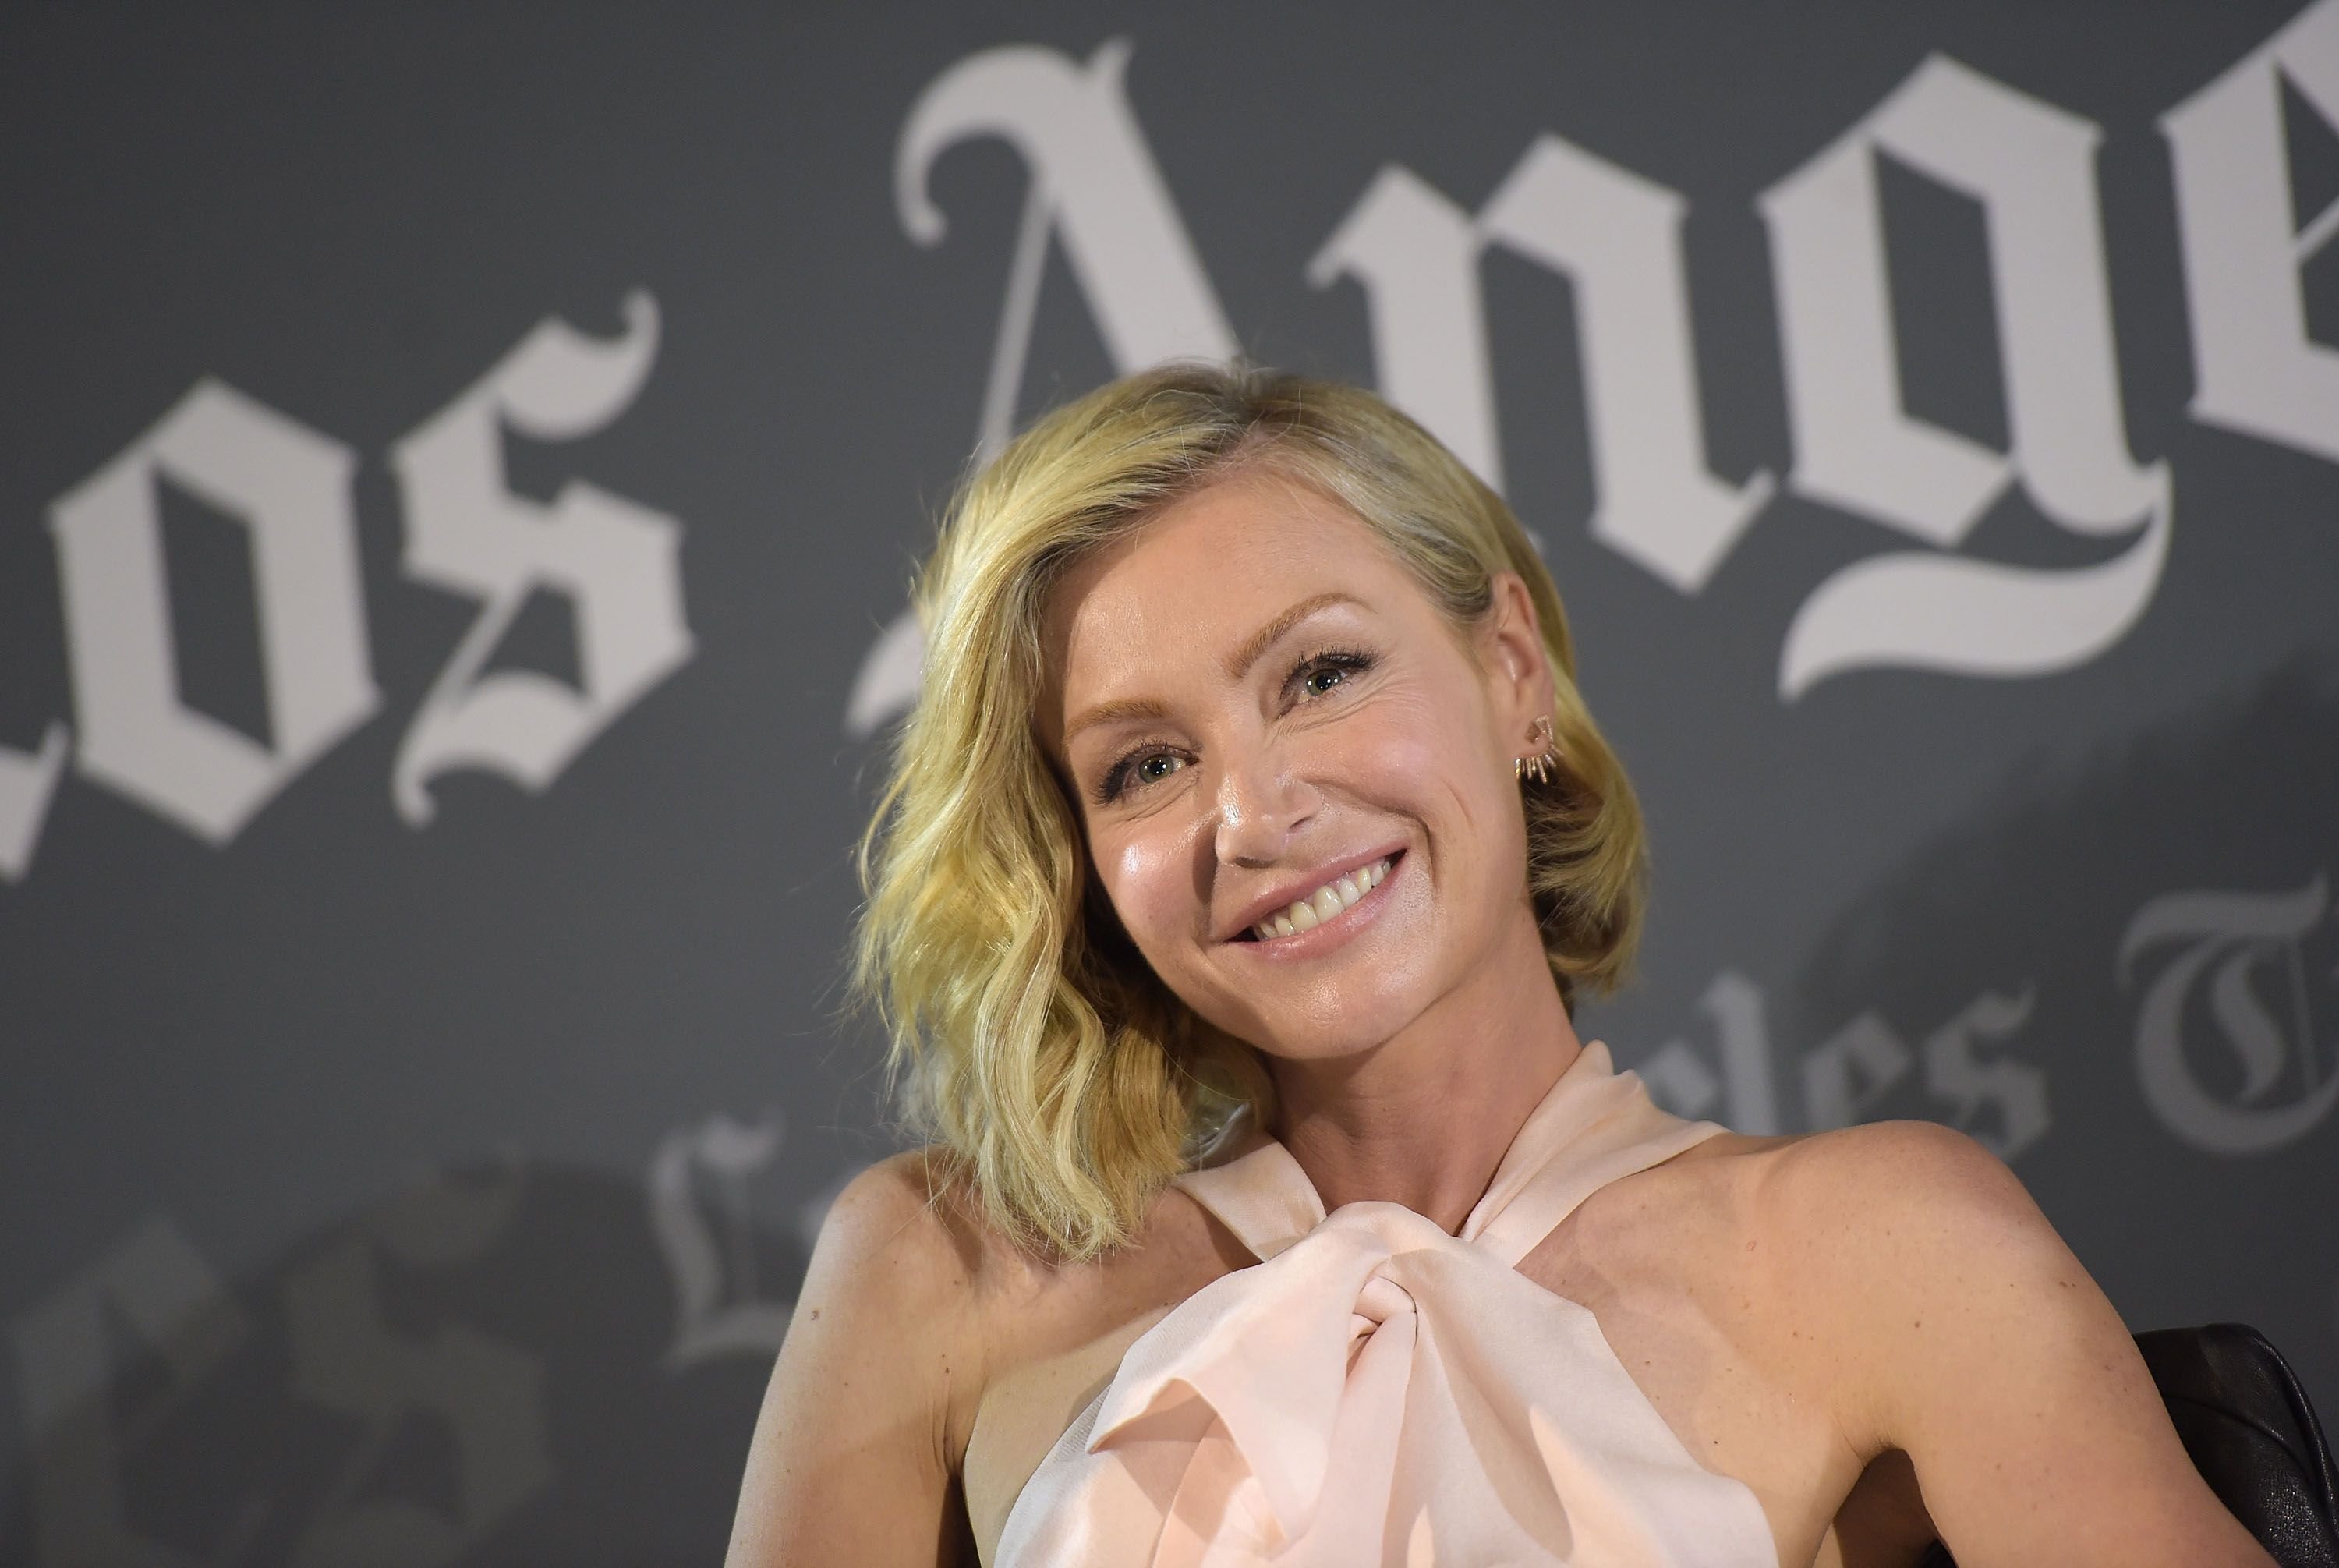  Portia de Rossi during the Los Angeles Times Envelope Screening of "Scandal" at ArcLight Sherman Oaks on May 20, 2015 in Sherman Oaks, California. | Source: Getty Images